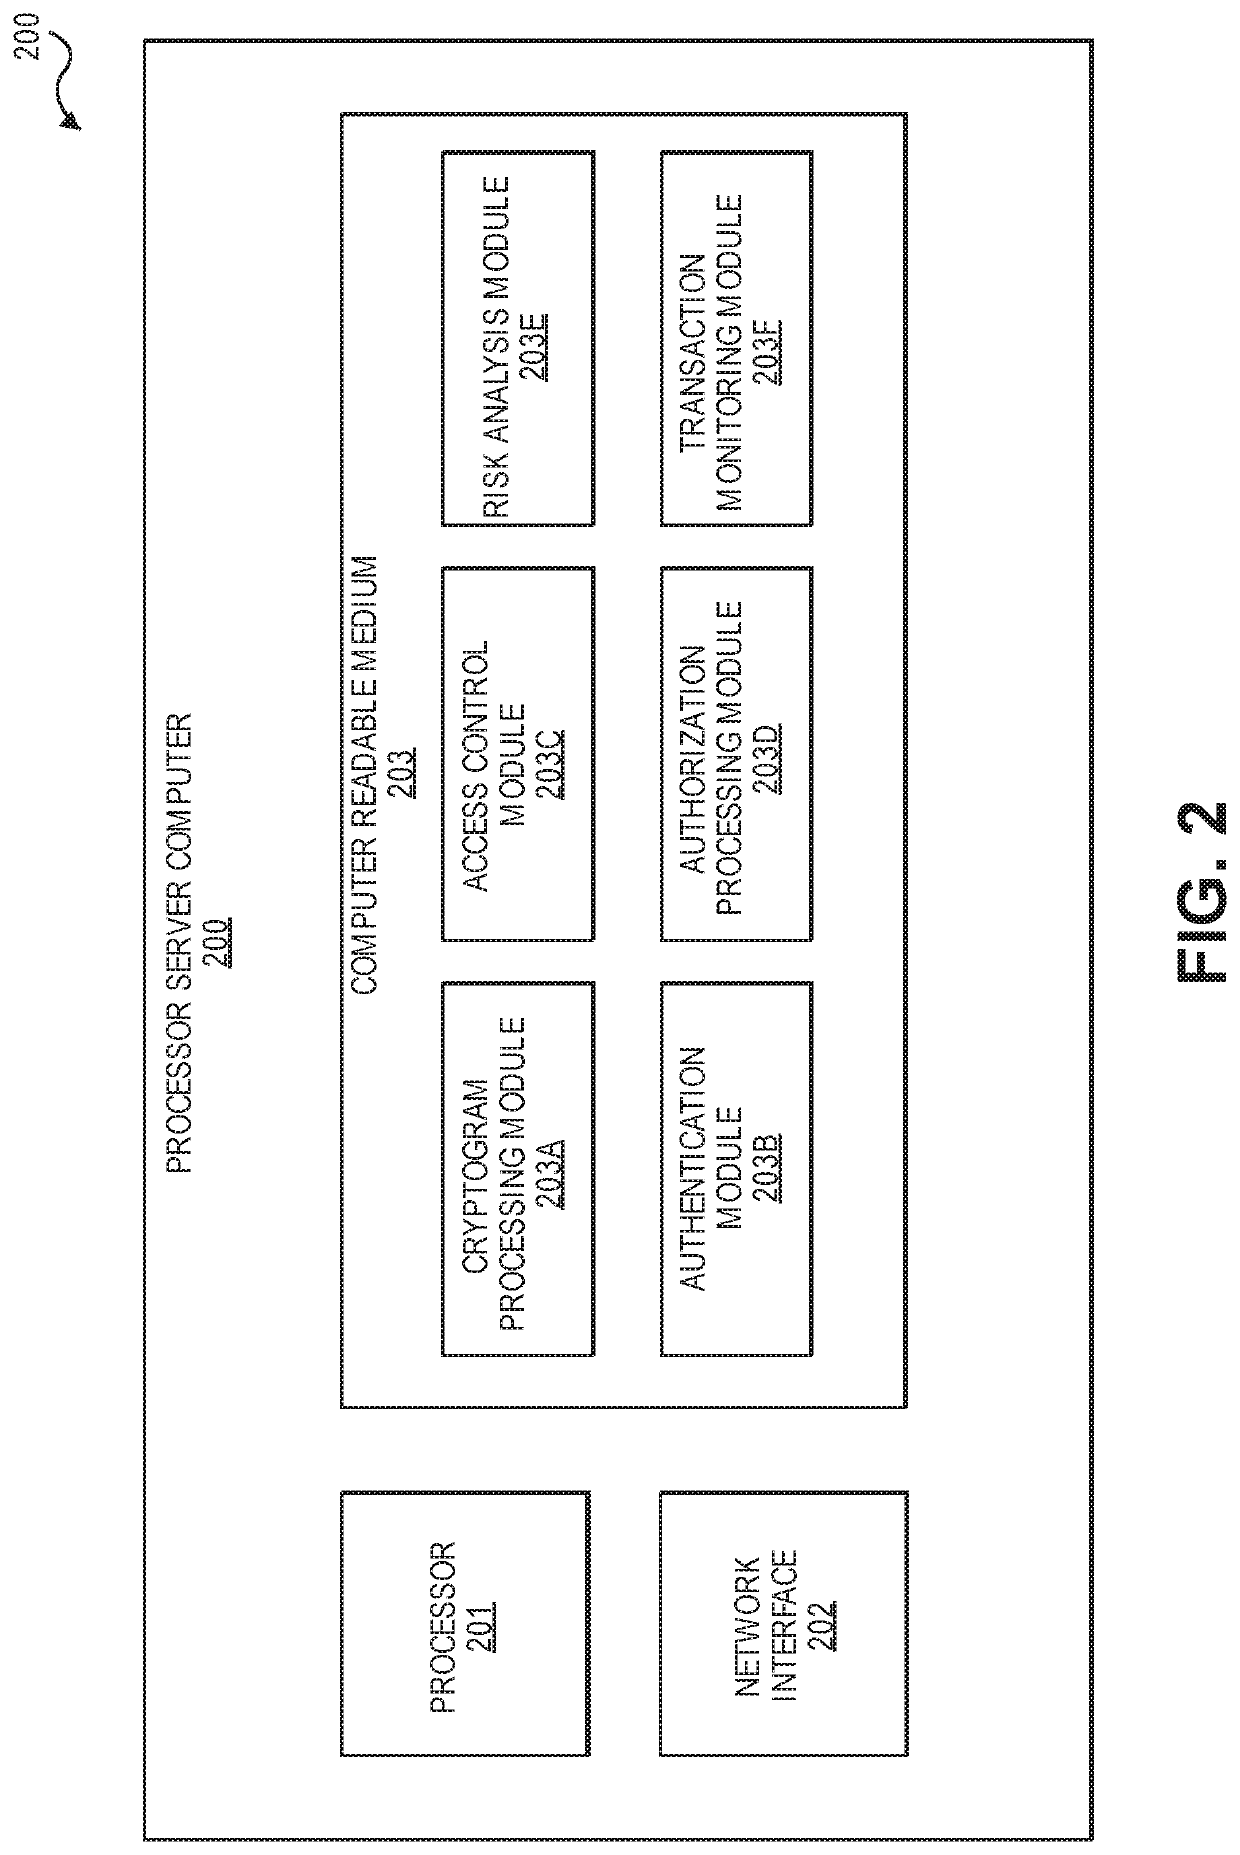 System and method for securely processing an electronic identity